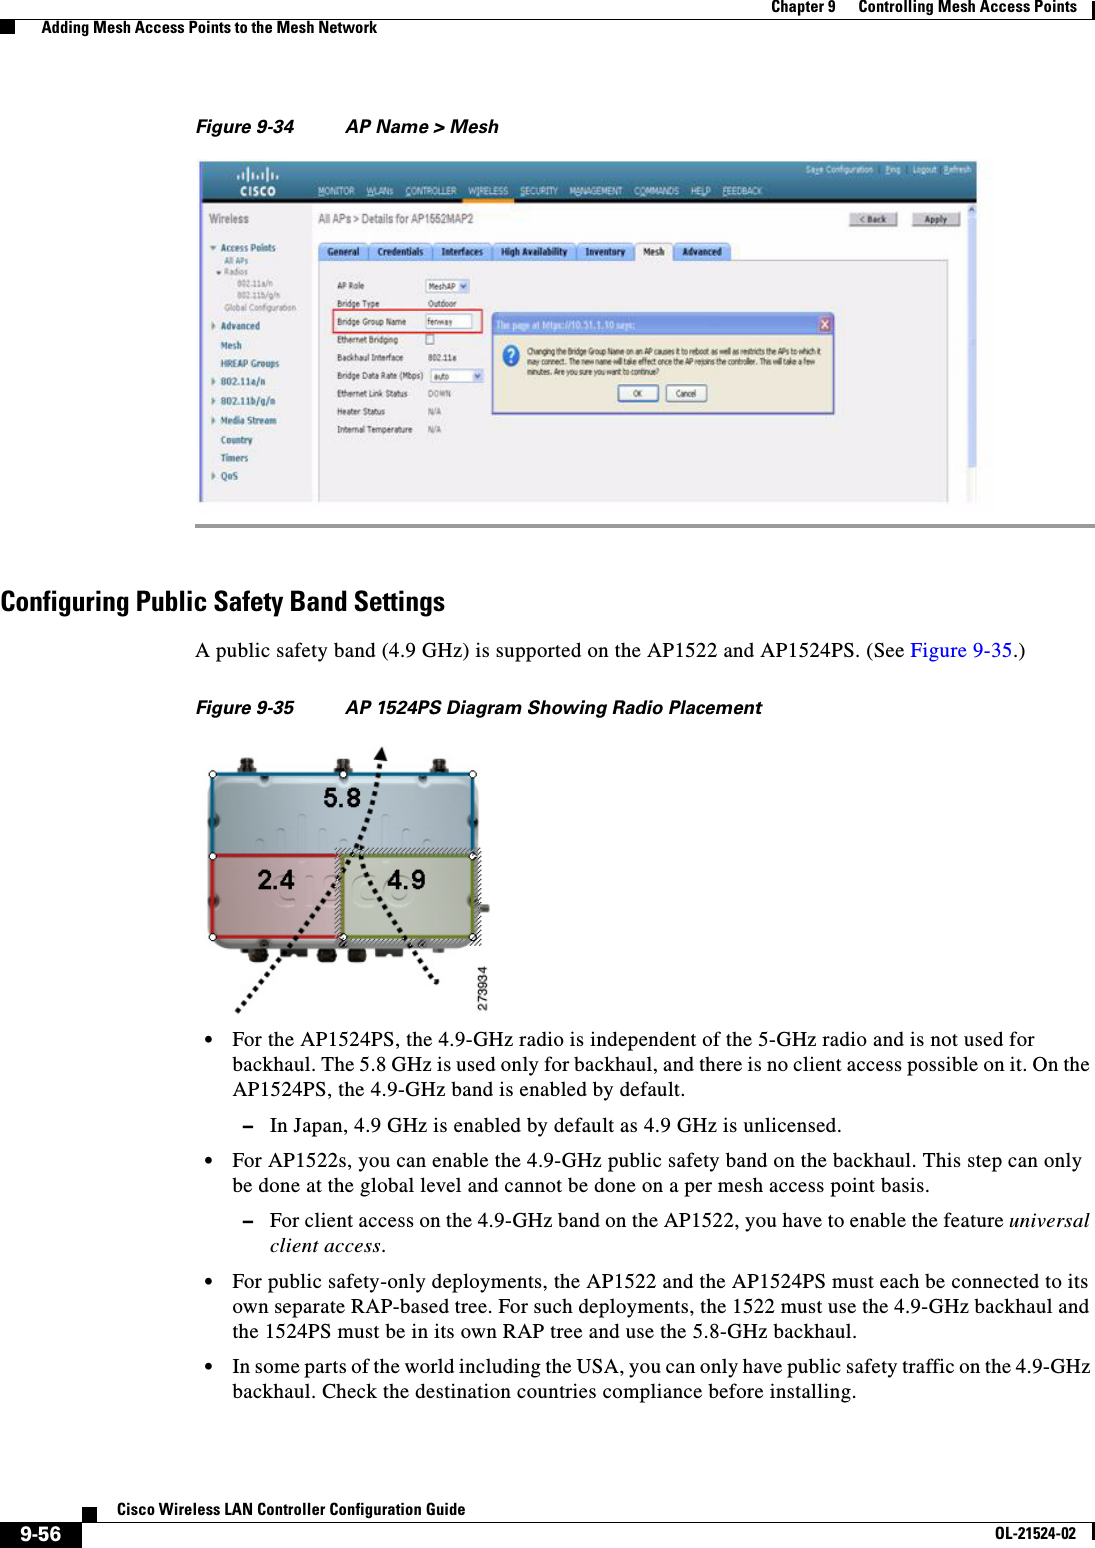  9-56Cisco Wireless LAN Controller Configuration GuideOL-21524-02Chapter 9      Controlling Mesh Access Points  Adding Mesh Access Points to the Mesh NetworkFigure 9-34 AP Name &gt; MeshConfiguring Public Safety Band SettingsA public safety band (4.9 GHz) is supported on the AP1522 and AP1524PS. (See Figure 9-35.)Figure 9-35 AP 1524PS Diagram Showing Radio Placement  • For the AP1524PS, the 4.9-GHz radio is independent of the 5-GHz radio and is not used for backhaul. The 5.8 GHz is used only for backhaul, and there is no client access possible on it. On the AP1524PS, the 4.9-GHz band is enabled by default.  –In Japan, 4.9 GHz is enabled by default as 4.9 GHz is unlicensed.  • For AP1522s, you can enable the 4.9-GHz public safety band on the backhaul. This step can only be done at the global level and cannot be done on a per mesh access point basis.   –For client access on the 4.9-GHz band on the AP1522, you have to enable the feature universal client access.   • For public safety-only deployments, the AP1522 and the AP1524PS must each be connected to its own separate RAP-based tree. For such deployments, the 1522 must use the 4.9-GHz backhaul and the 1524PS must be in its own RAP tree and use the 5.8-GHz backhaul.  • In some parts of the world including the USA, you can only have public safety traffic on the 4.9-GHz backhaul. Check the destination countries compliance before installing.